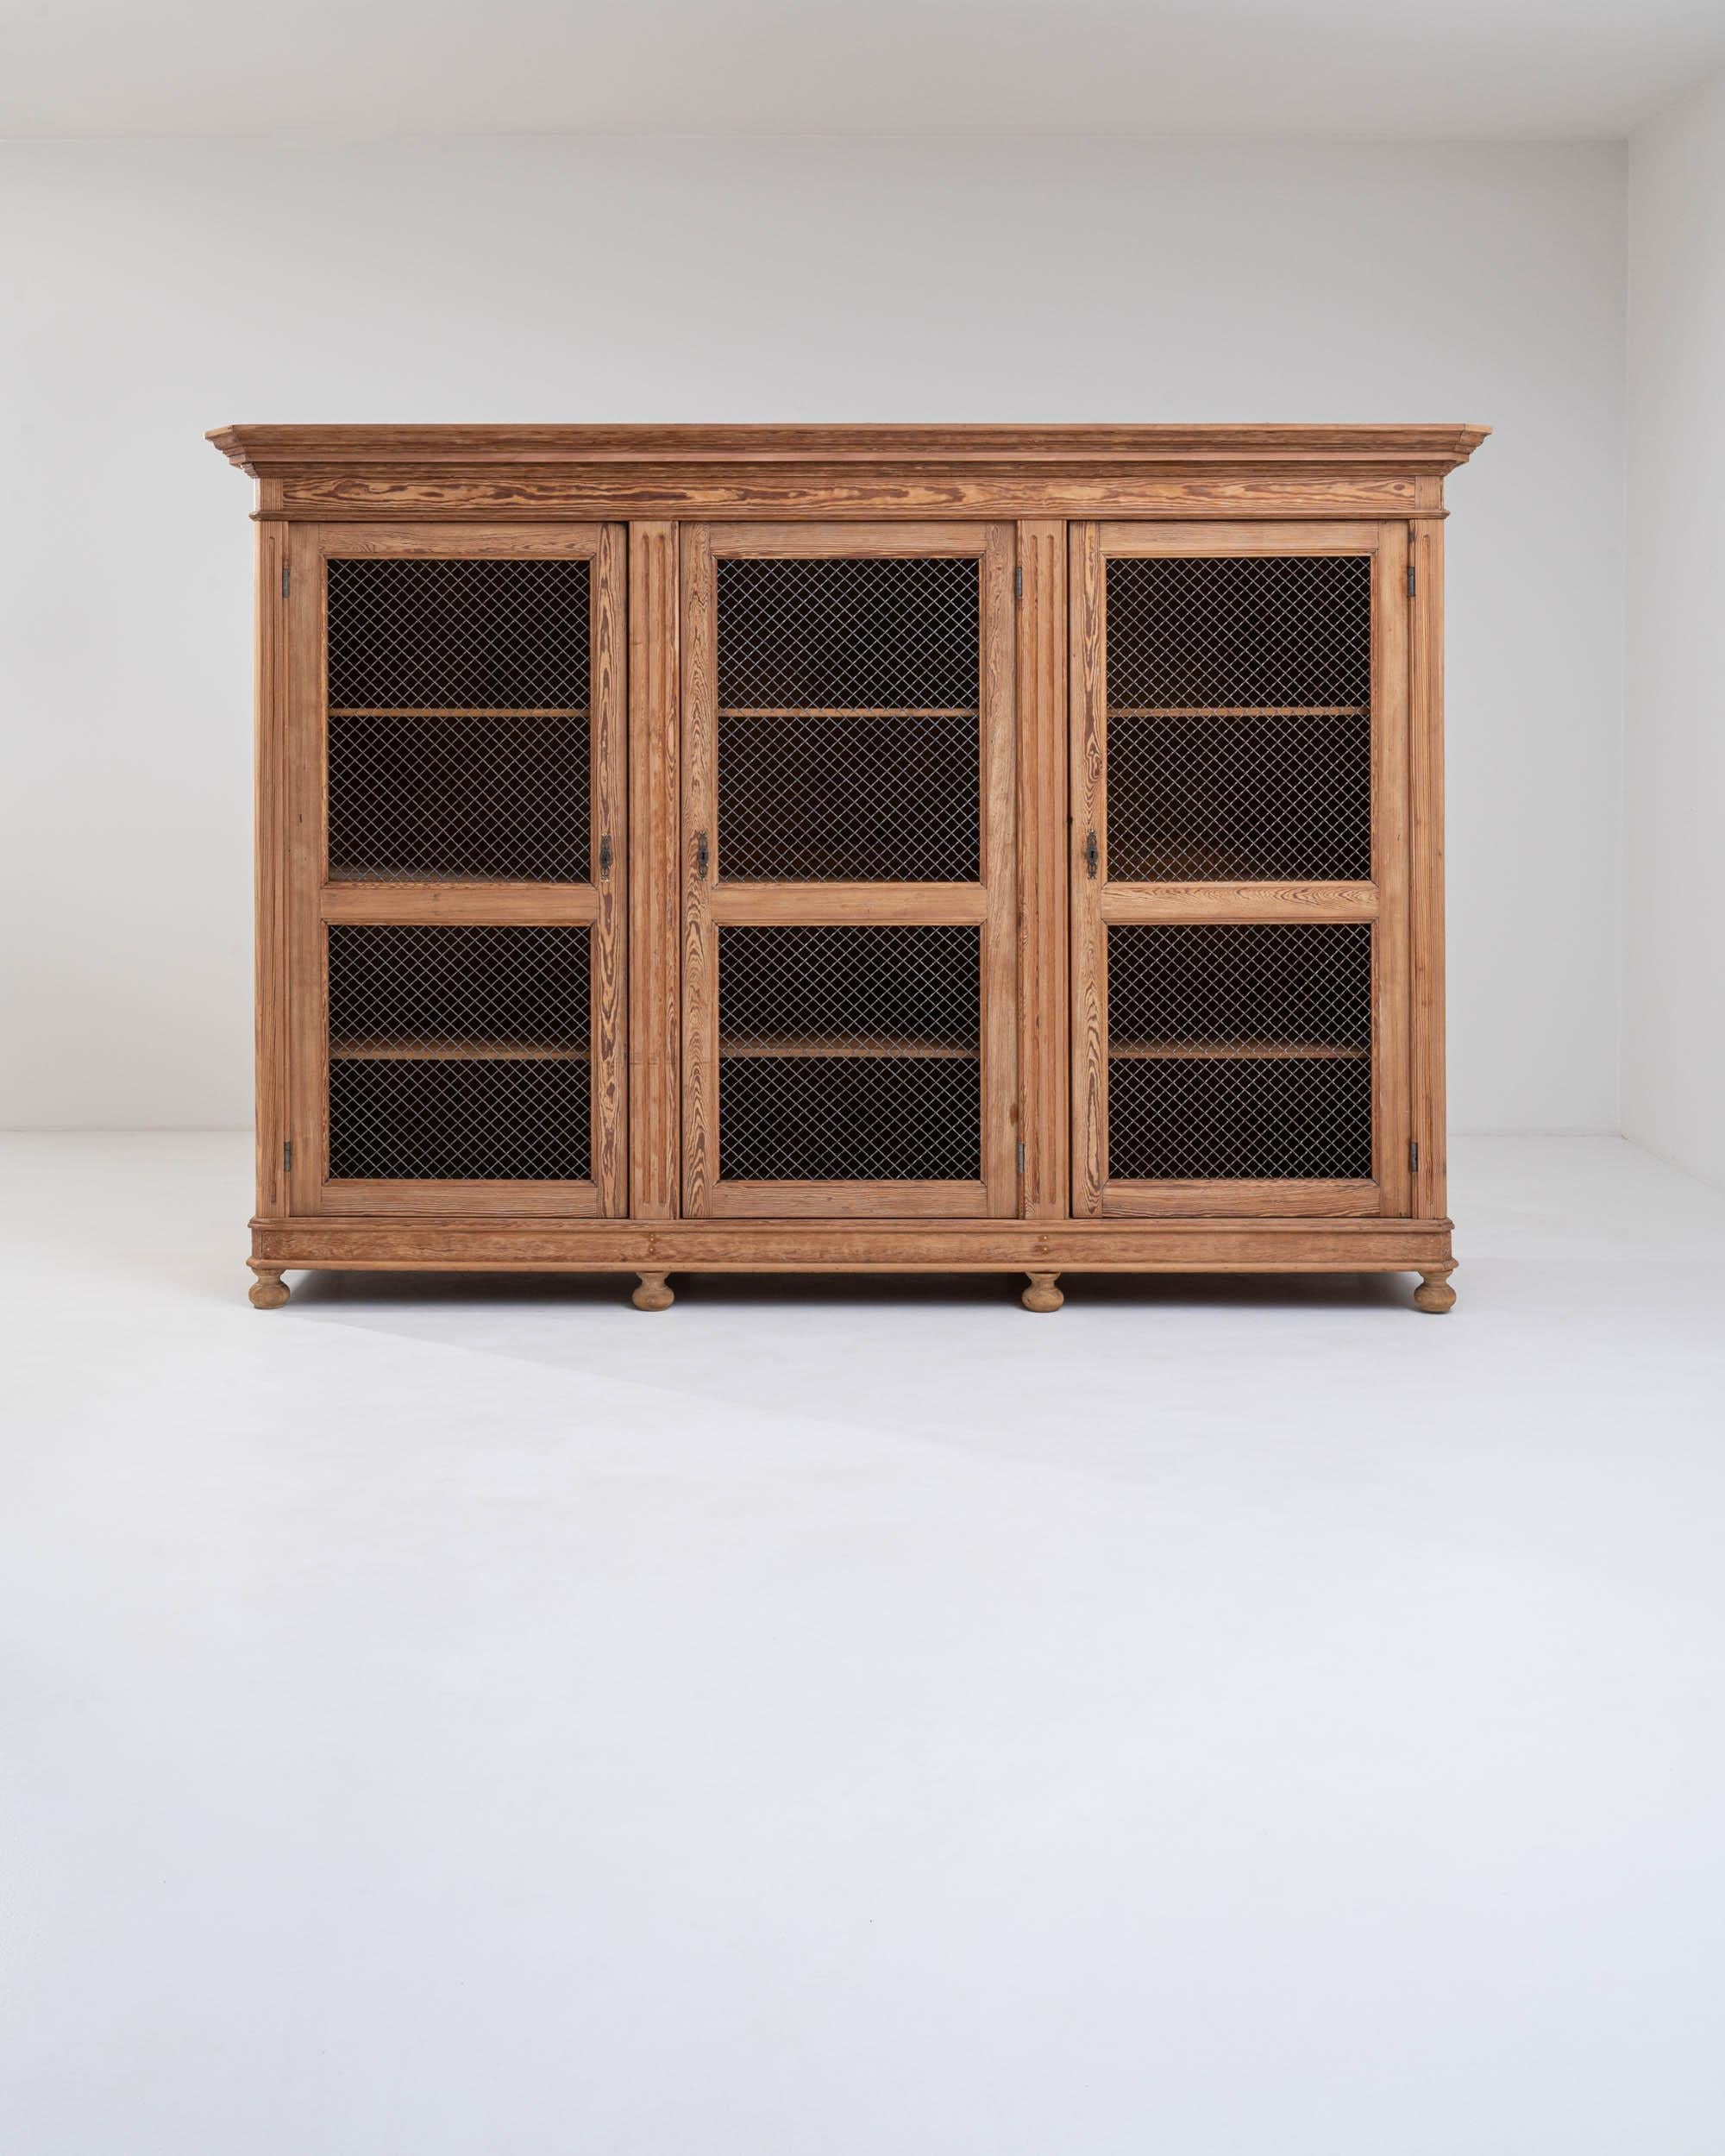 A wooden cabinet made in the 19th century in France. Crisscrossing metal forms a permeable barrier to the dozen storage compartments of this wooden cabinet. Mesh doors were once a common feature to allow airflow into linen cabinets or larders. The